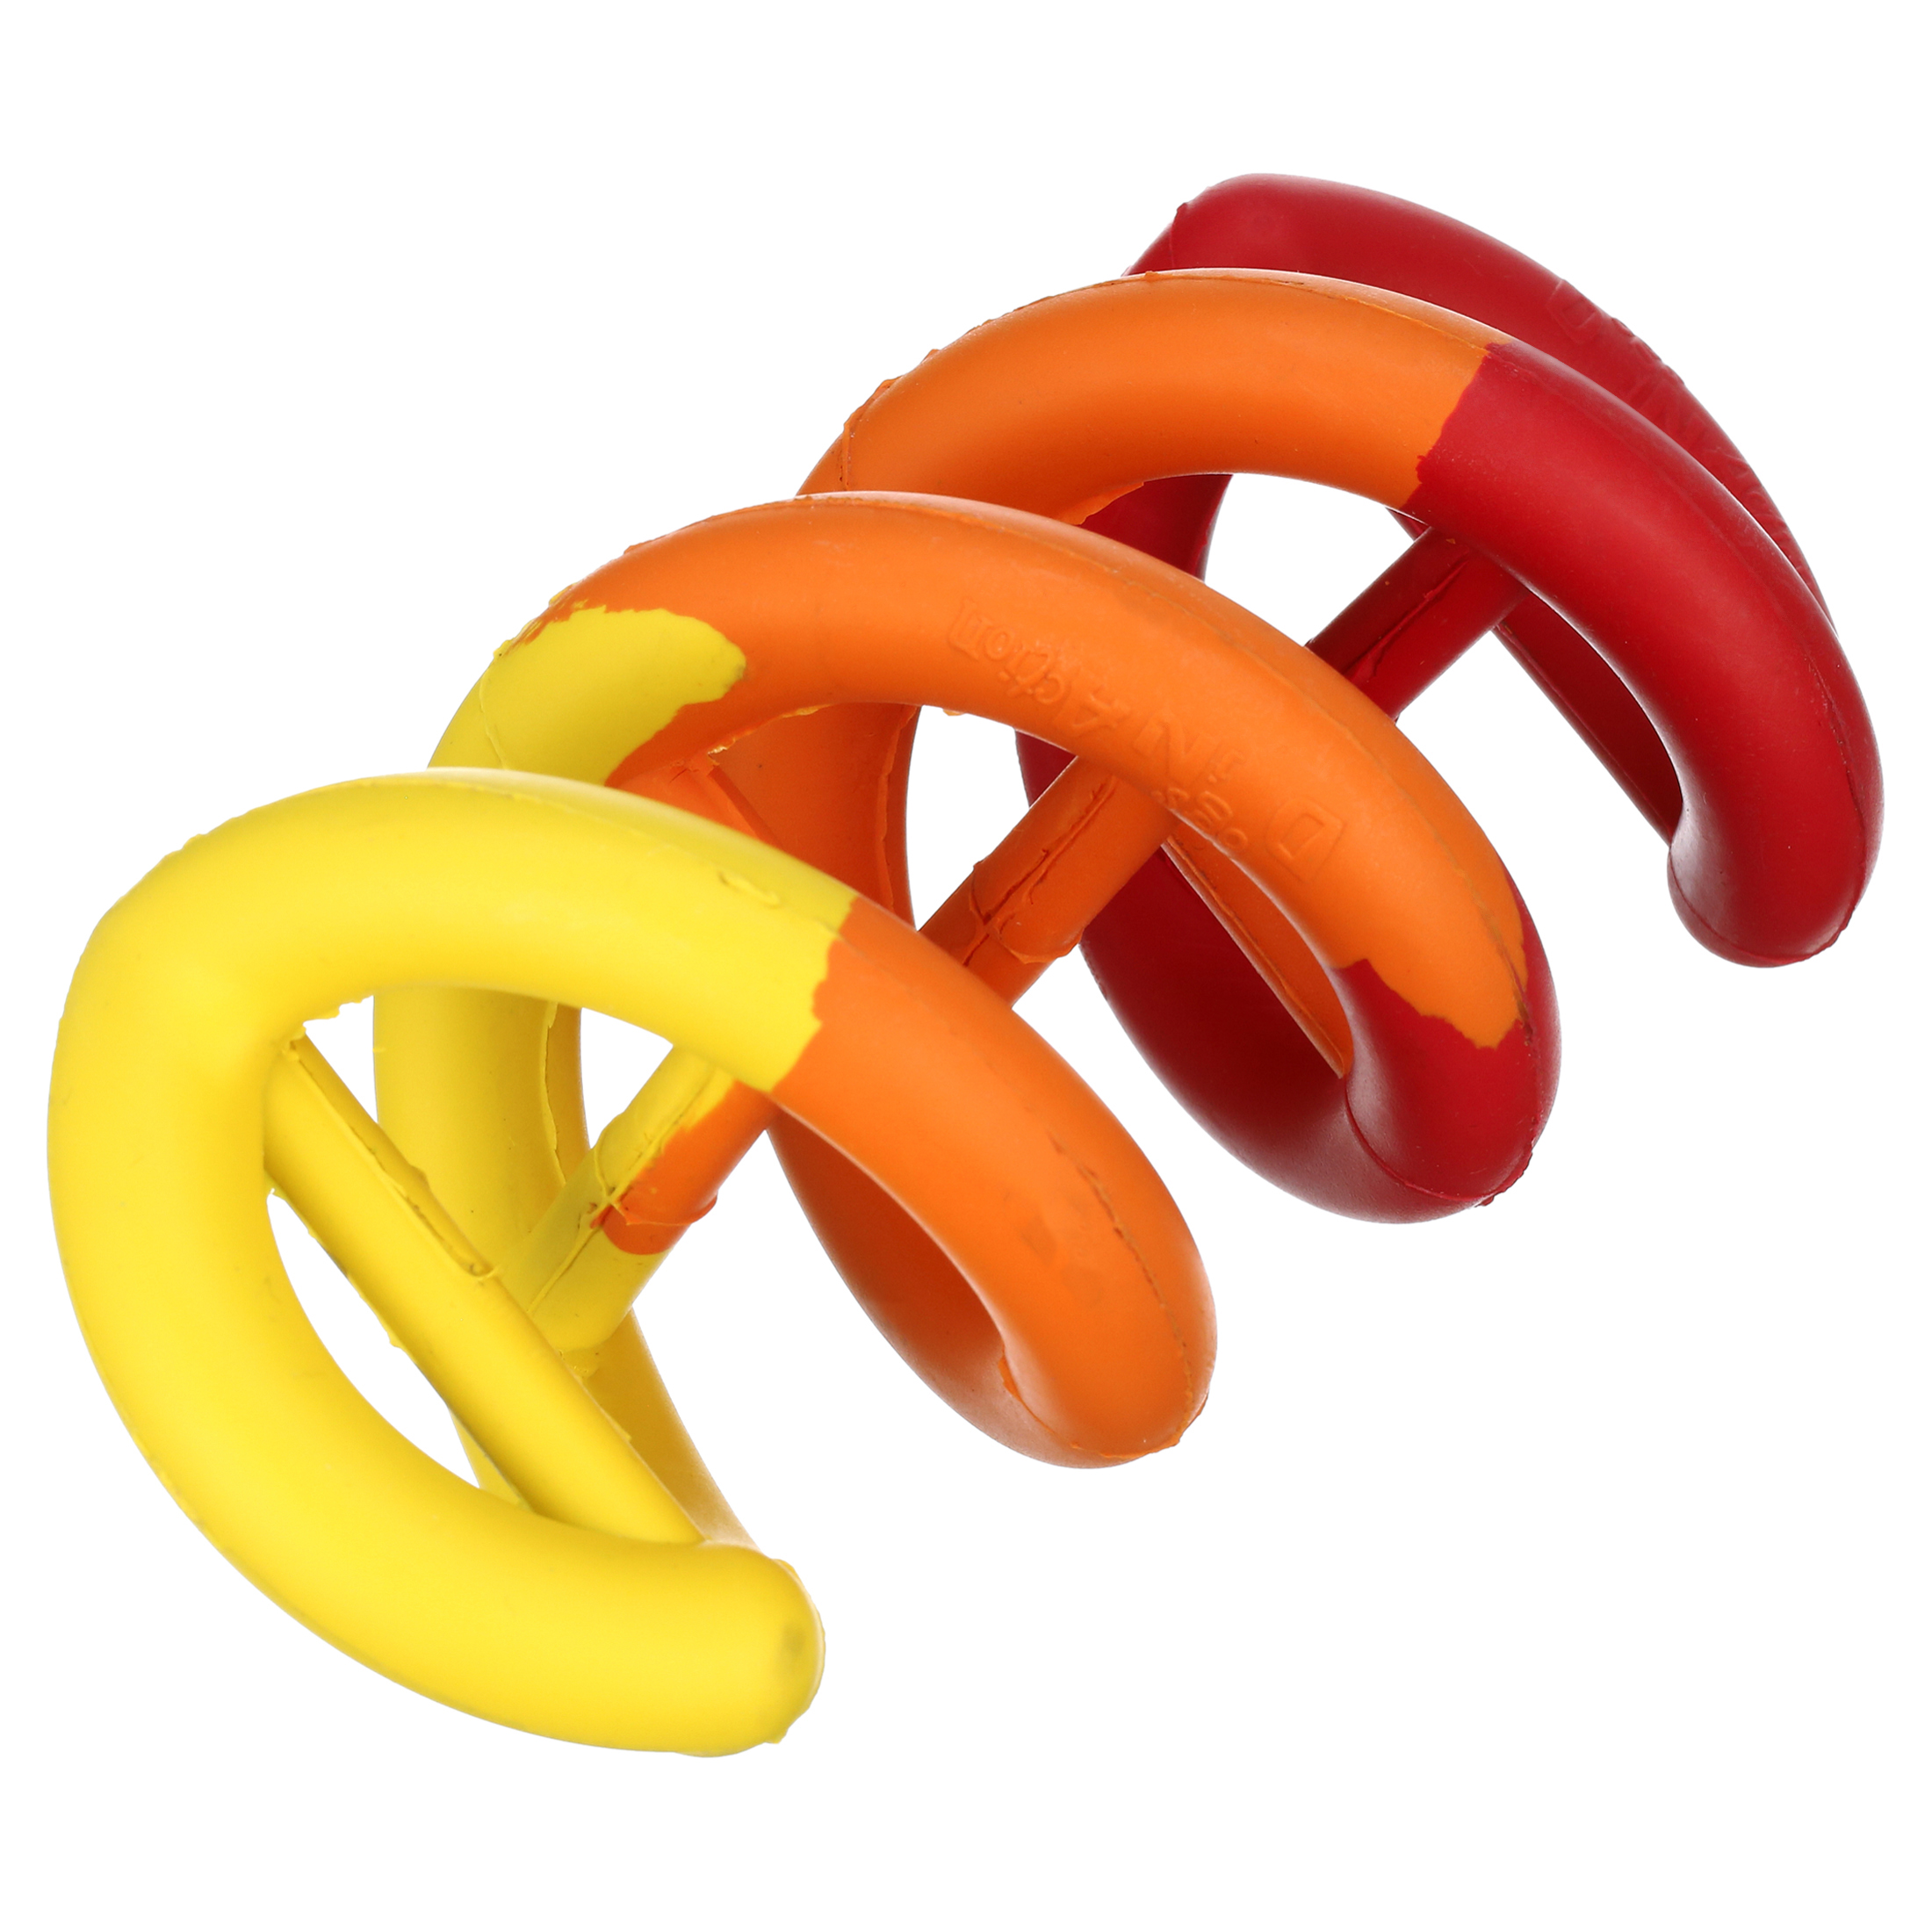 JW Dogs in Action Double Helix Shaped Rubber Chew and Tug Dog Toy, Multicolor, Large, Pack of 1 - image 1 of 5